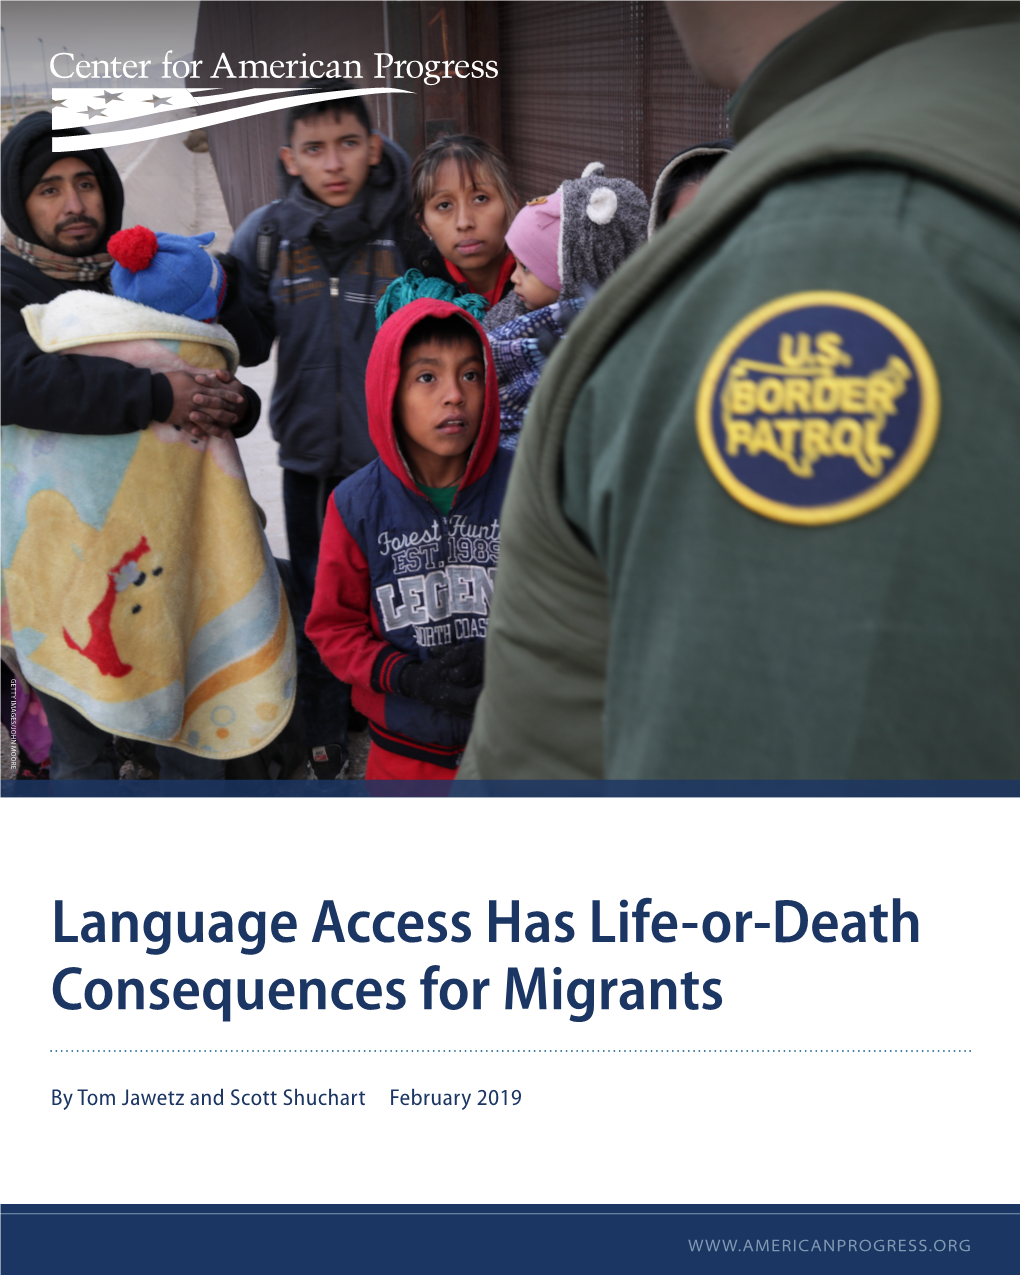 Language Access Has Life-Or-Death Consequences for Migrants